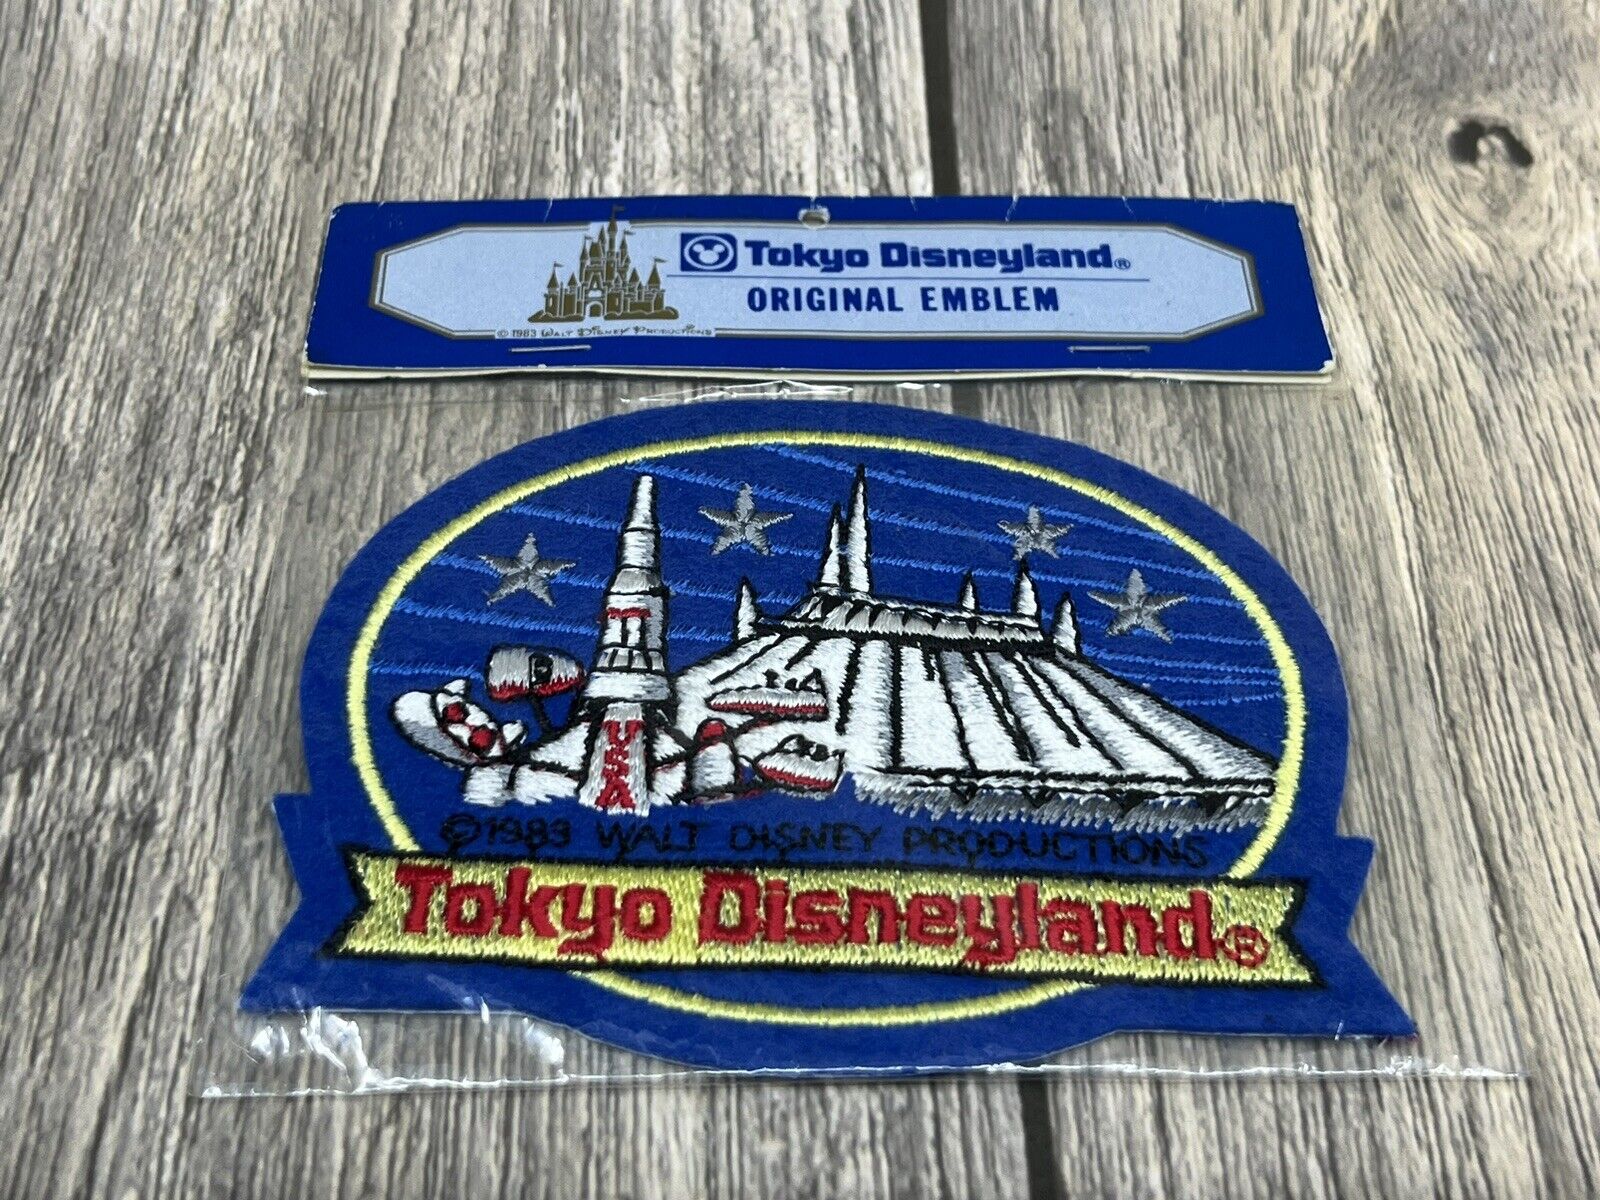 Tokyo Japan Disneyland 1983 Grand Opening Tomorrowland Space Mountain Patch New